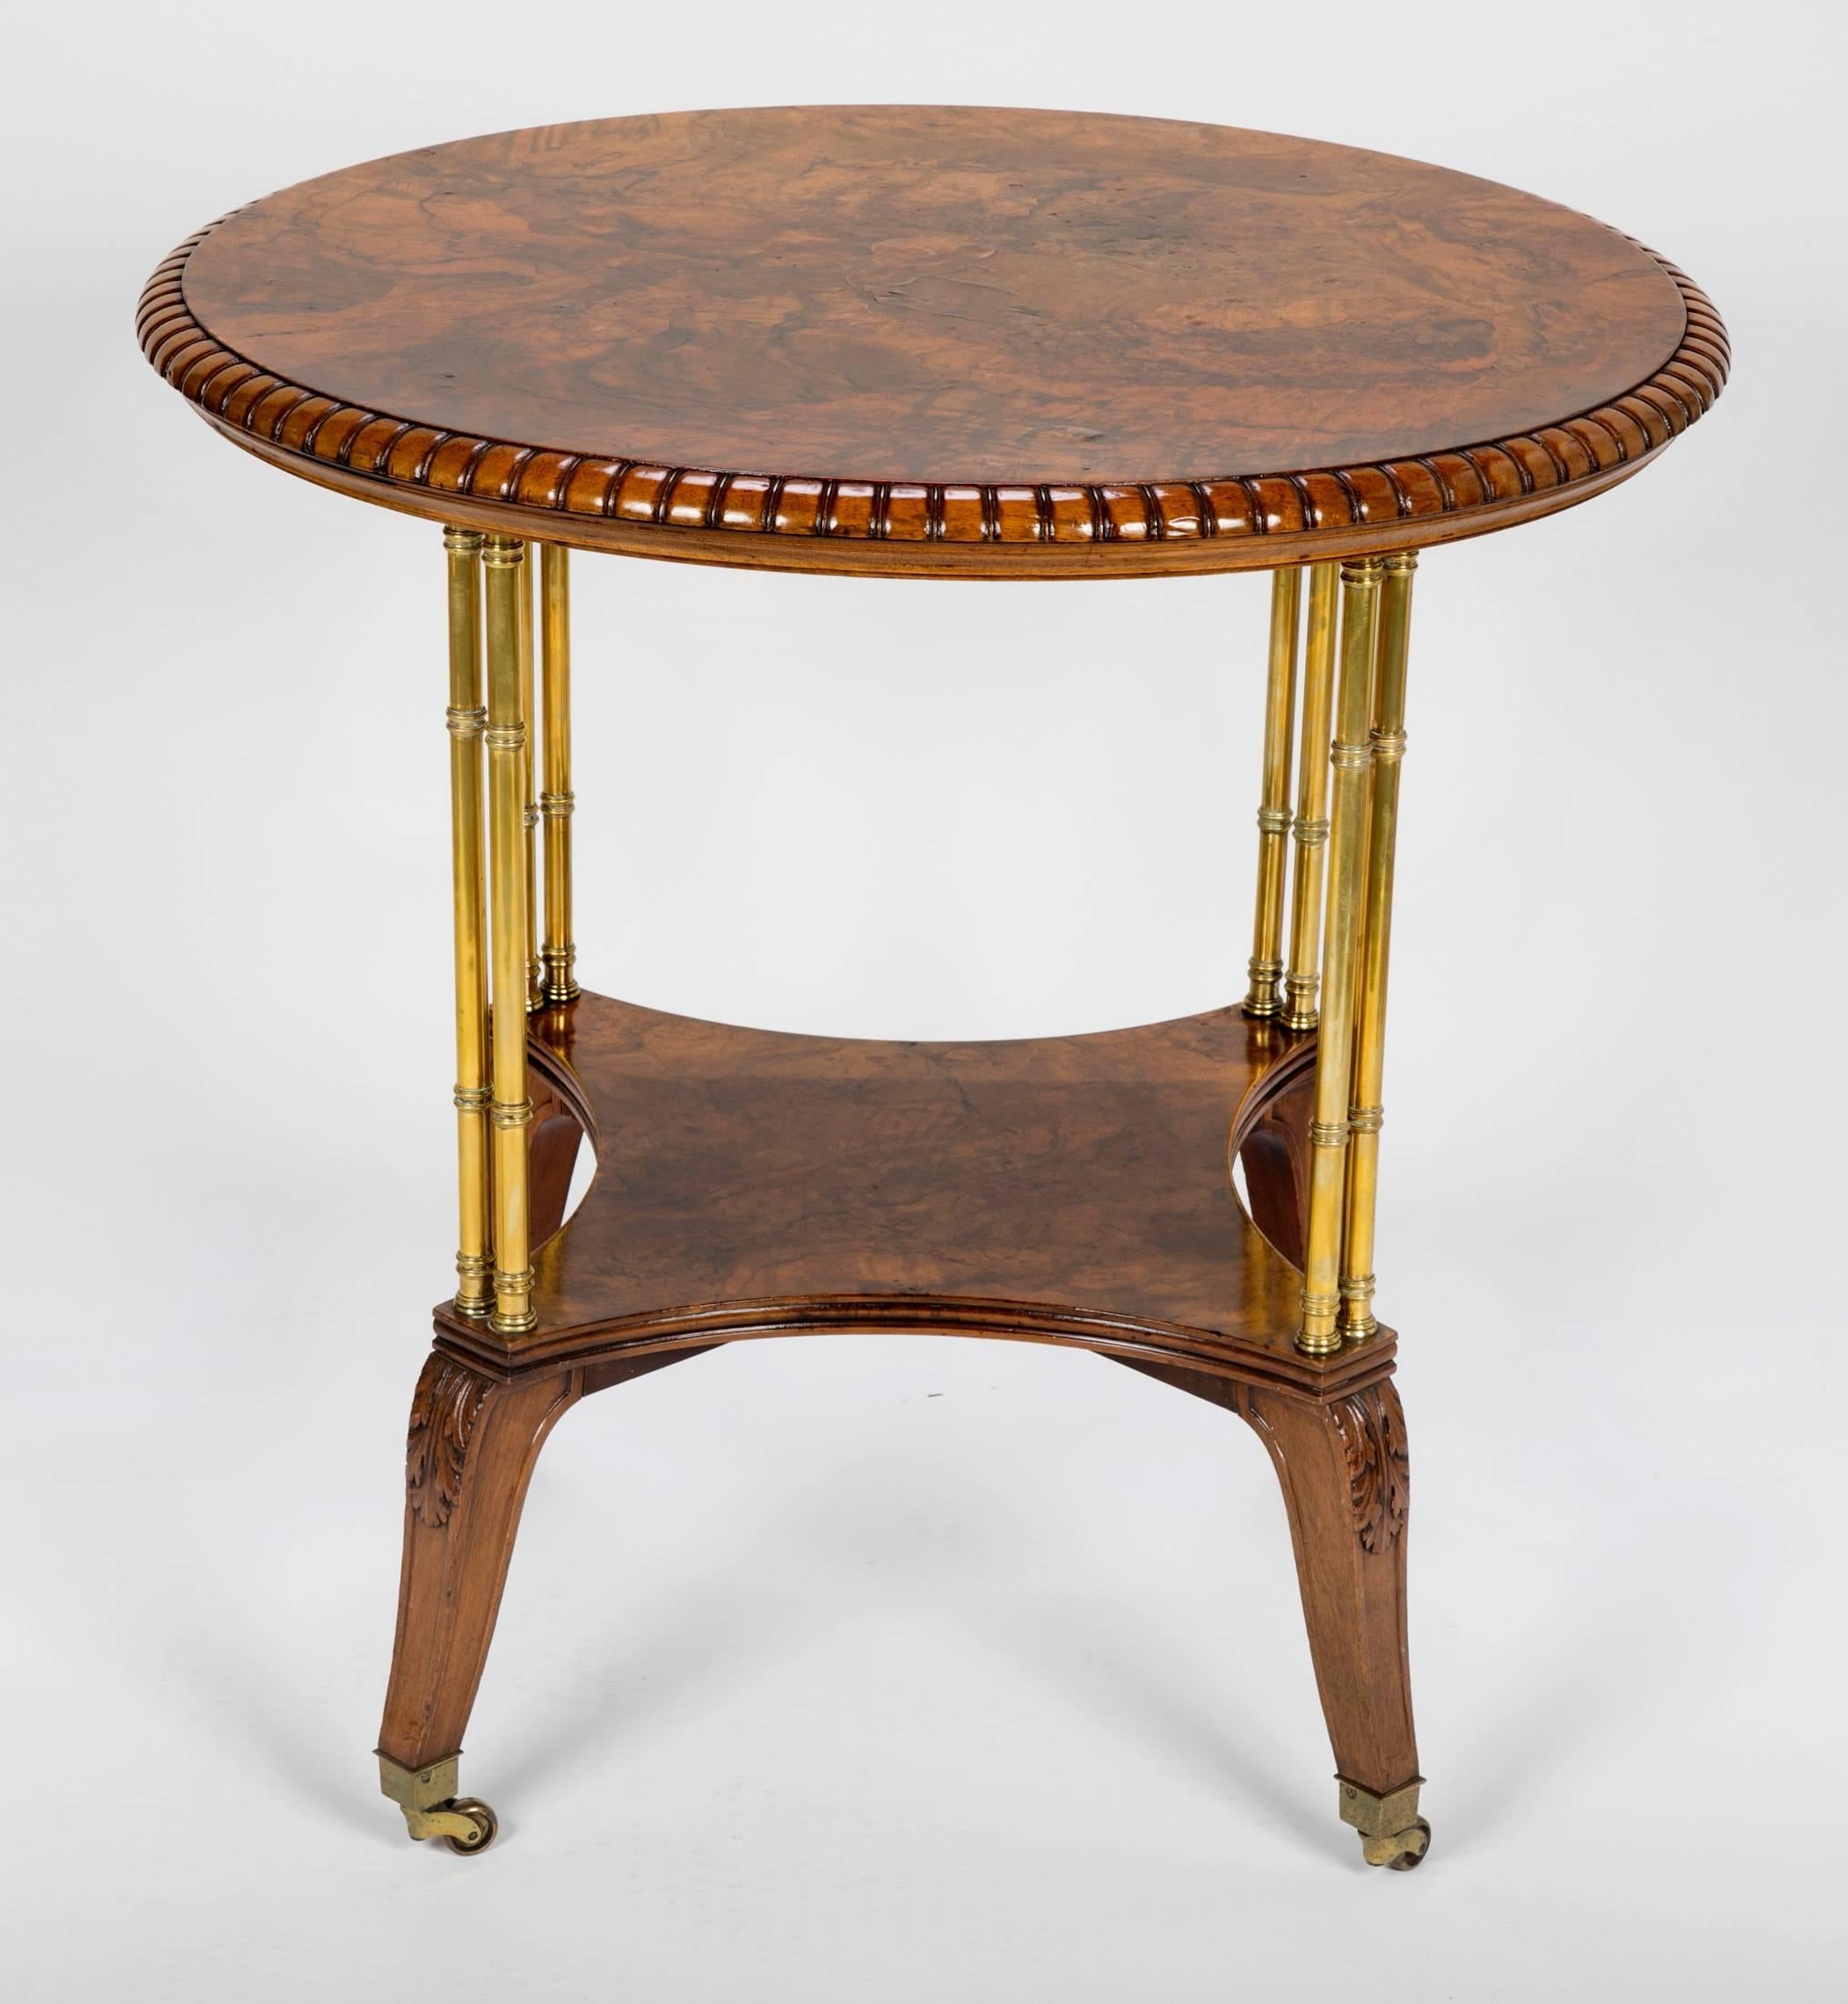 19th Century Victorian Burl Walnut Table by Holland & Sons